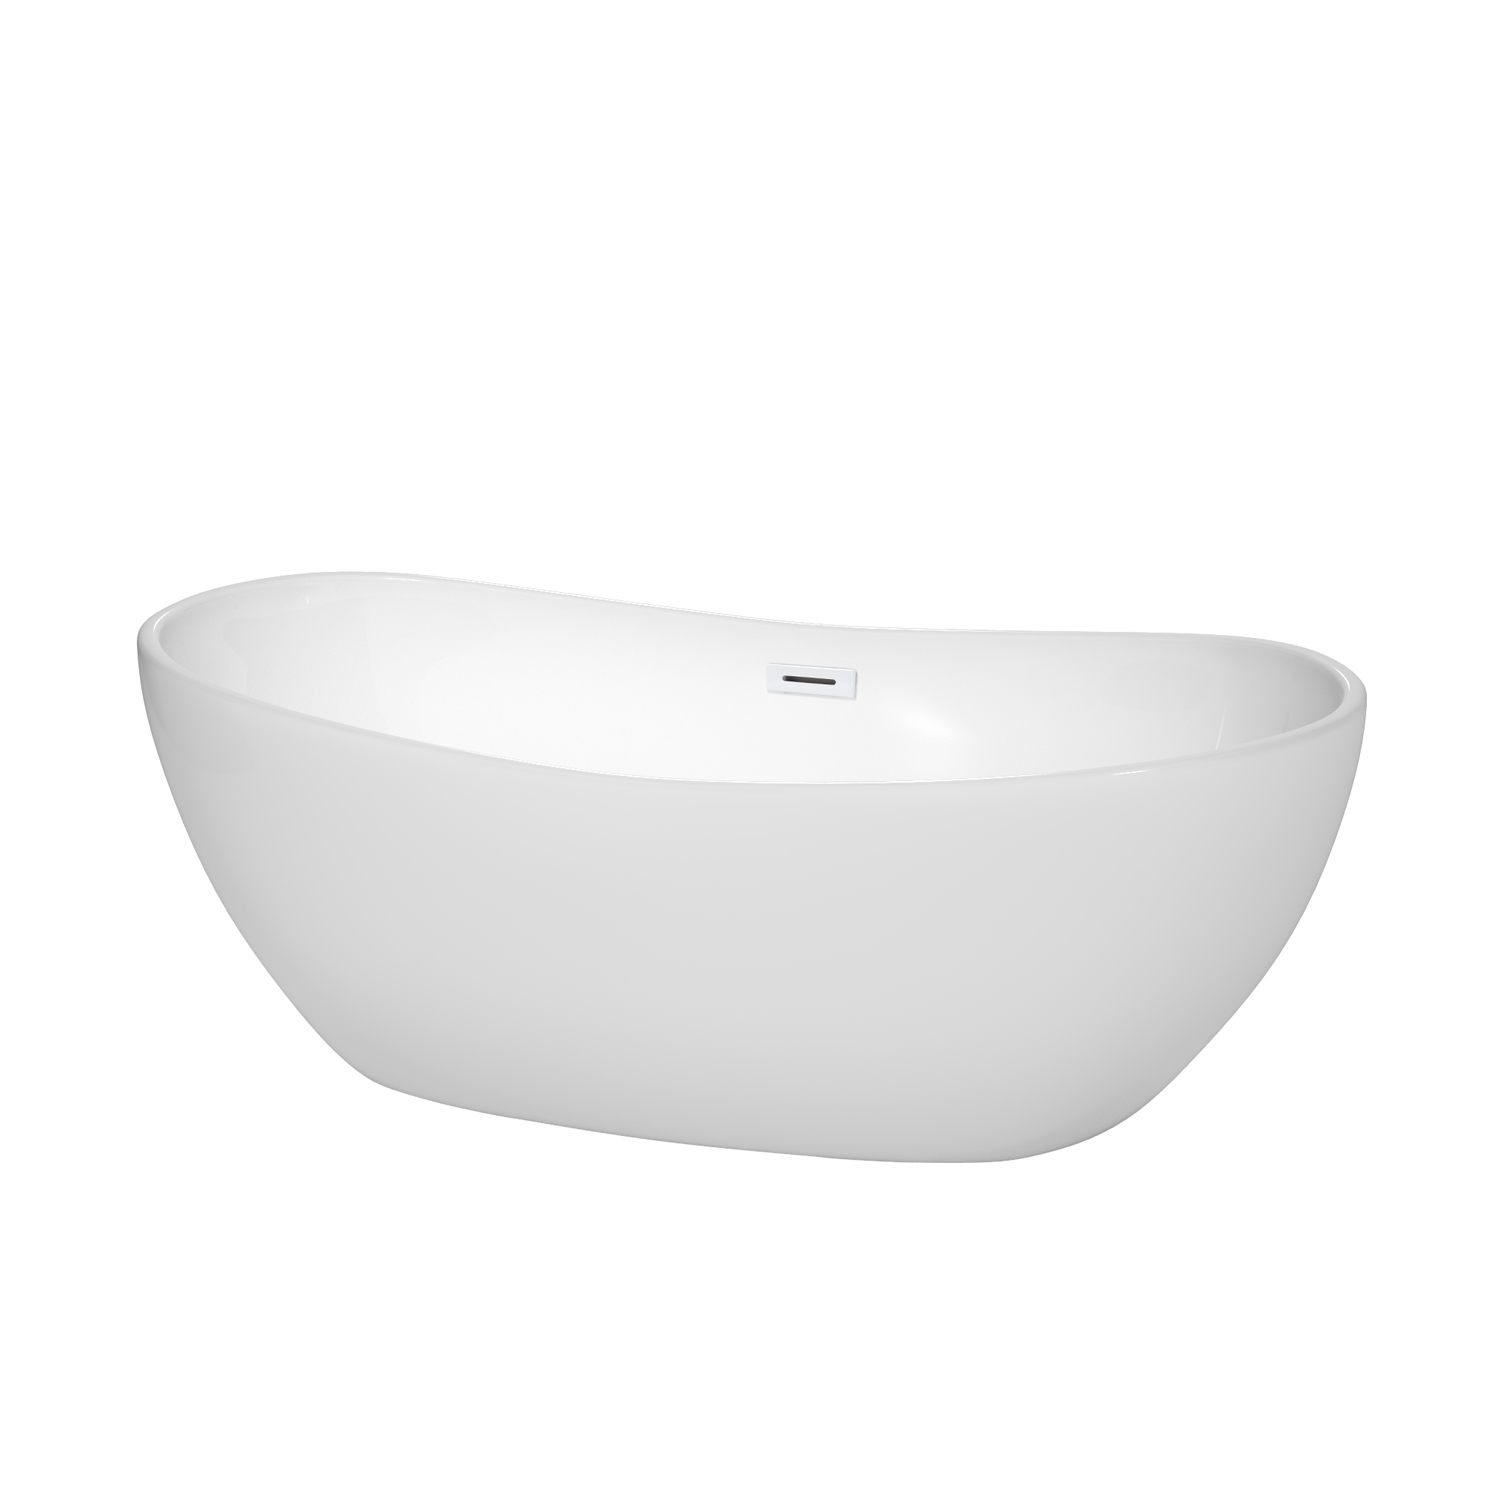 65" Freestanding Bathtub in White Finish with Overflow Trim and Shiny White Drain